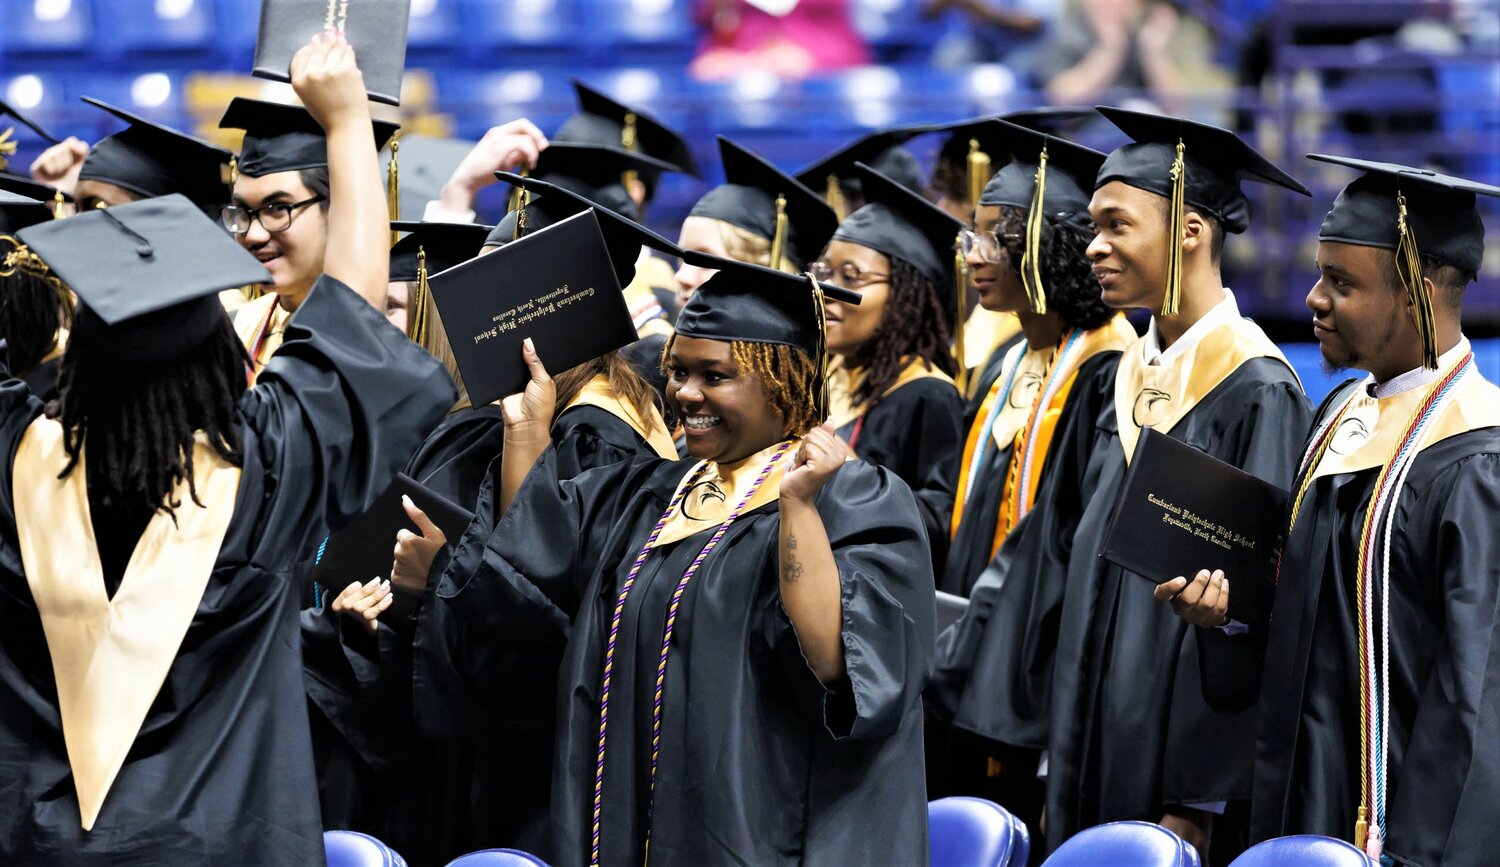 Students of Cumberland Polytechnic High School celebrate graduation Thursday at the Crown Coliseum.